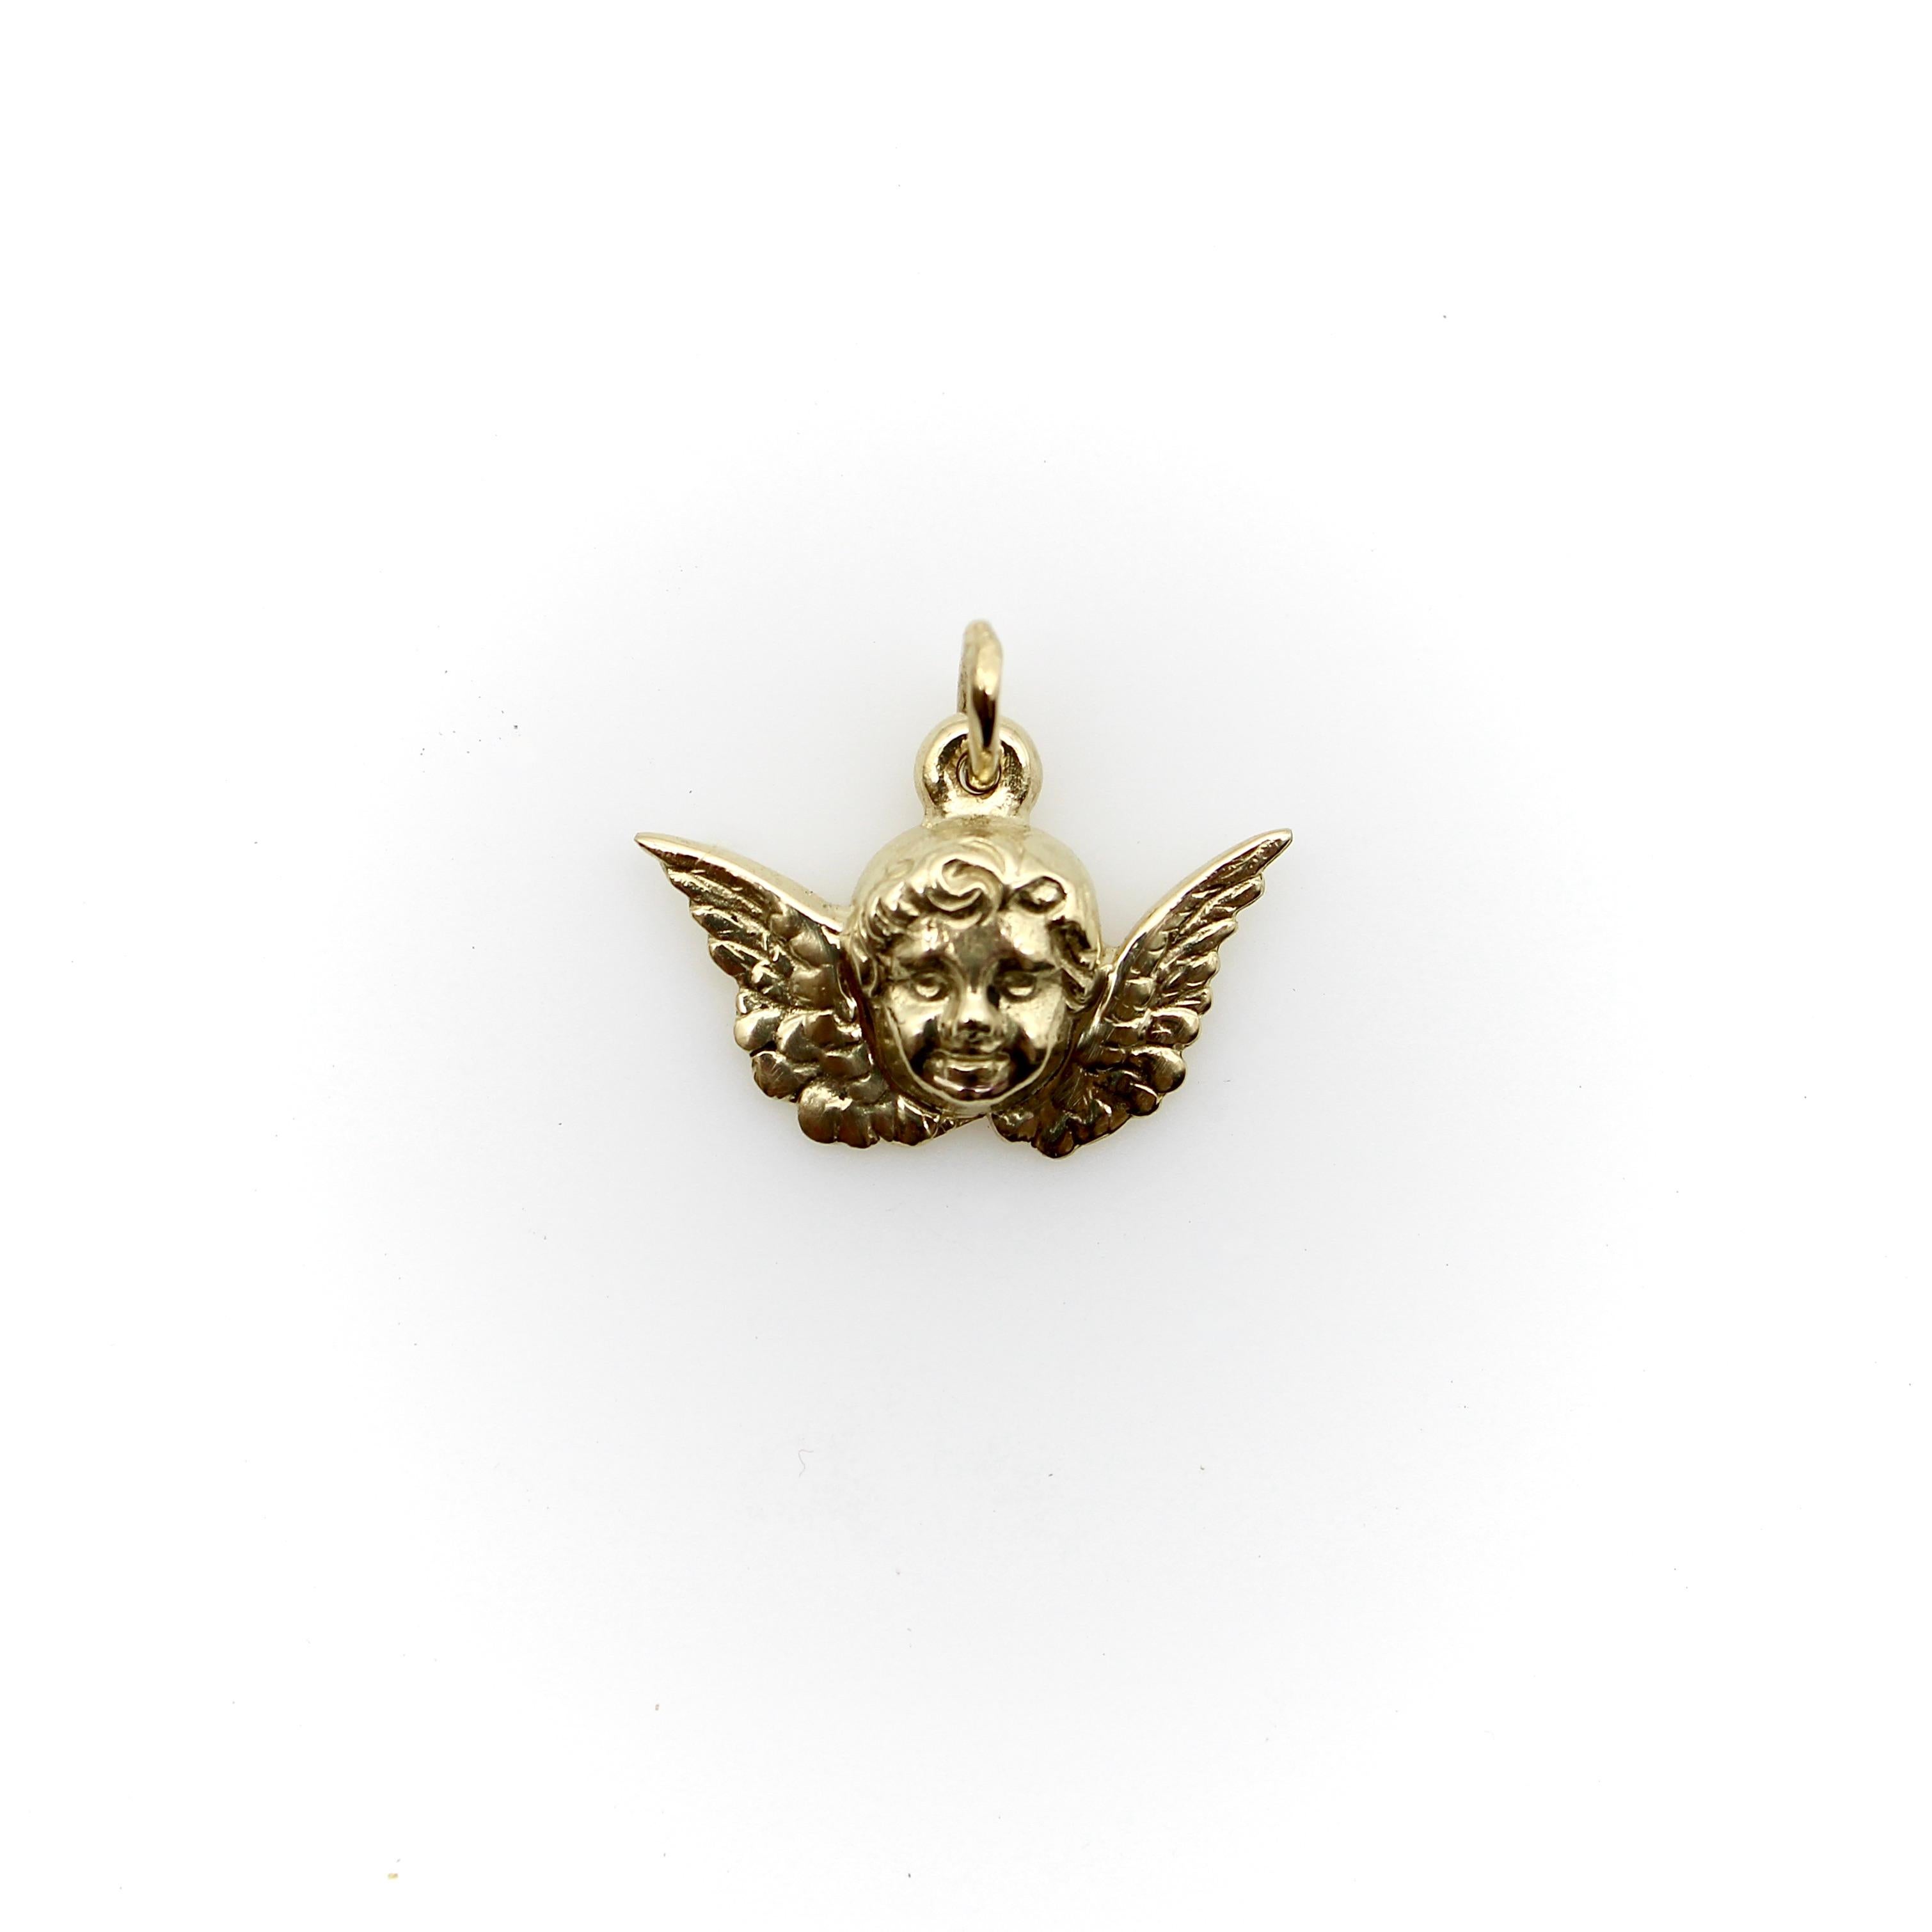 This winged cherub face stole our heart at Kirsten's Corner and had to become a signature piece. It is a Victorian inspired little putti, made of 14K gold. An incredibly detailed sweet baby face with flowing curls is framed by classic outstretched